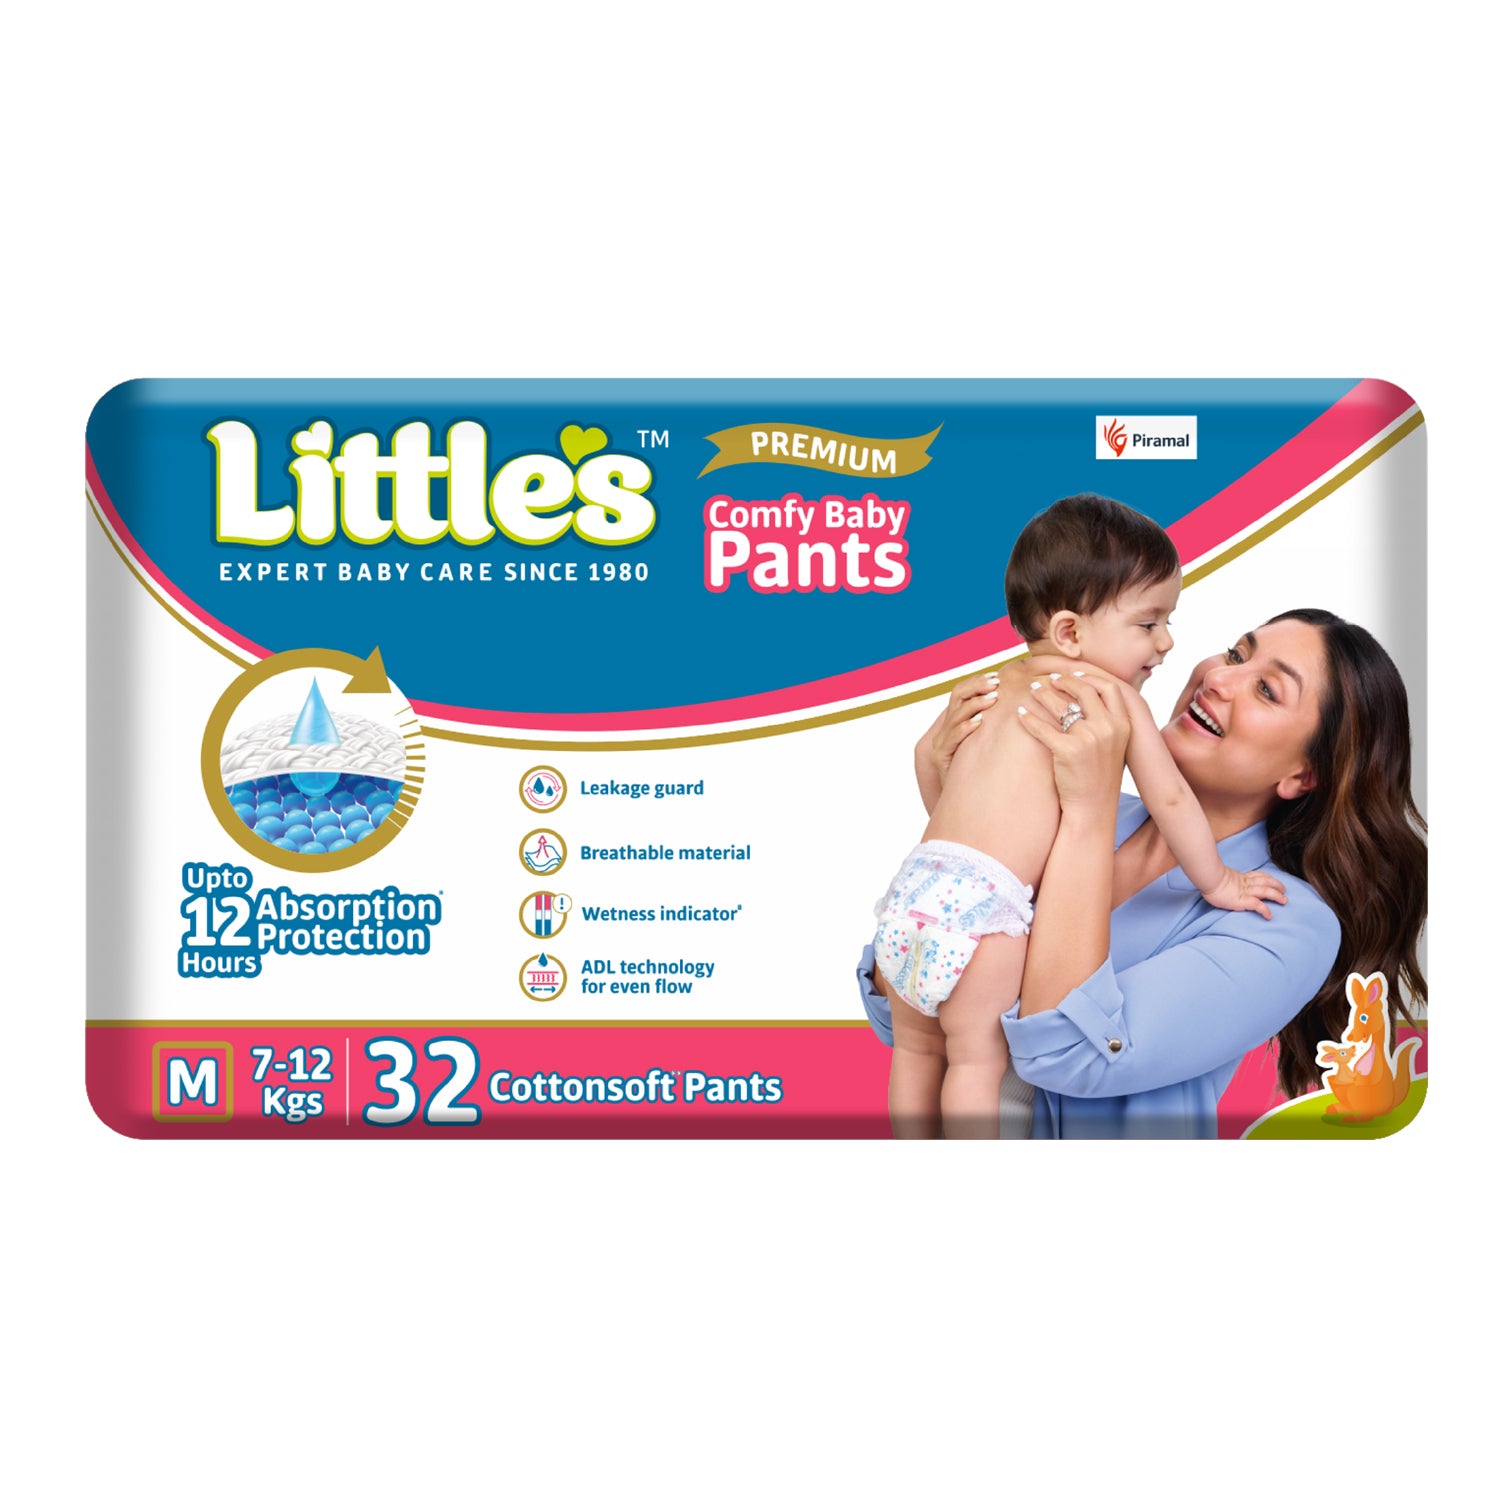 Baby pant diaper (Medium size) 75 pcs in one pack